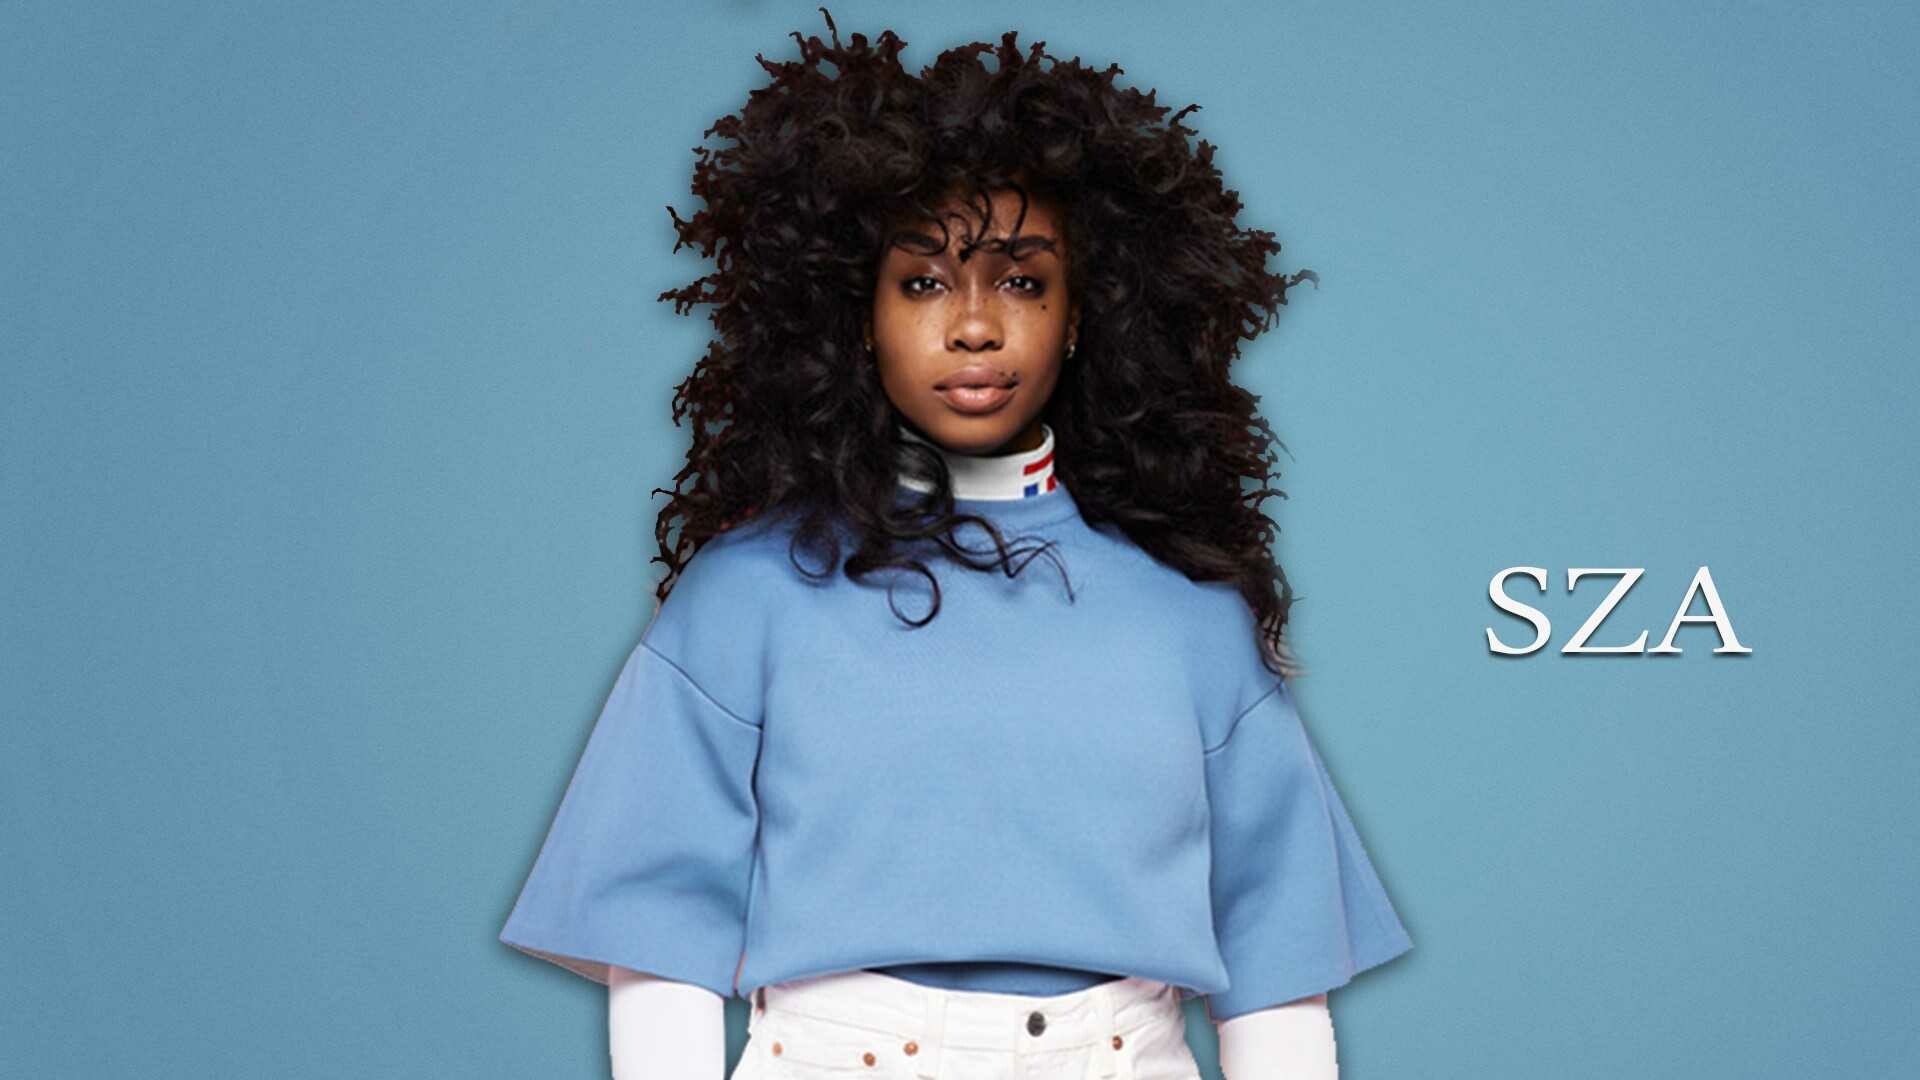 SZA: A neo-soul singer whose music is described as alternative RnB, with elements of soul, hip hop, minimalist RnB, cloud rap, witch house, and chillwave. 1920x1080 Full HD Wallpaper.